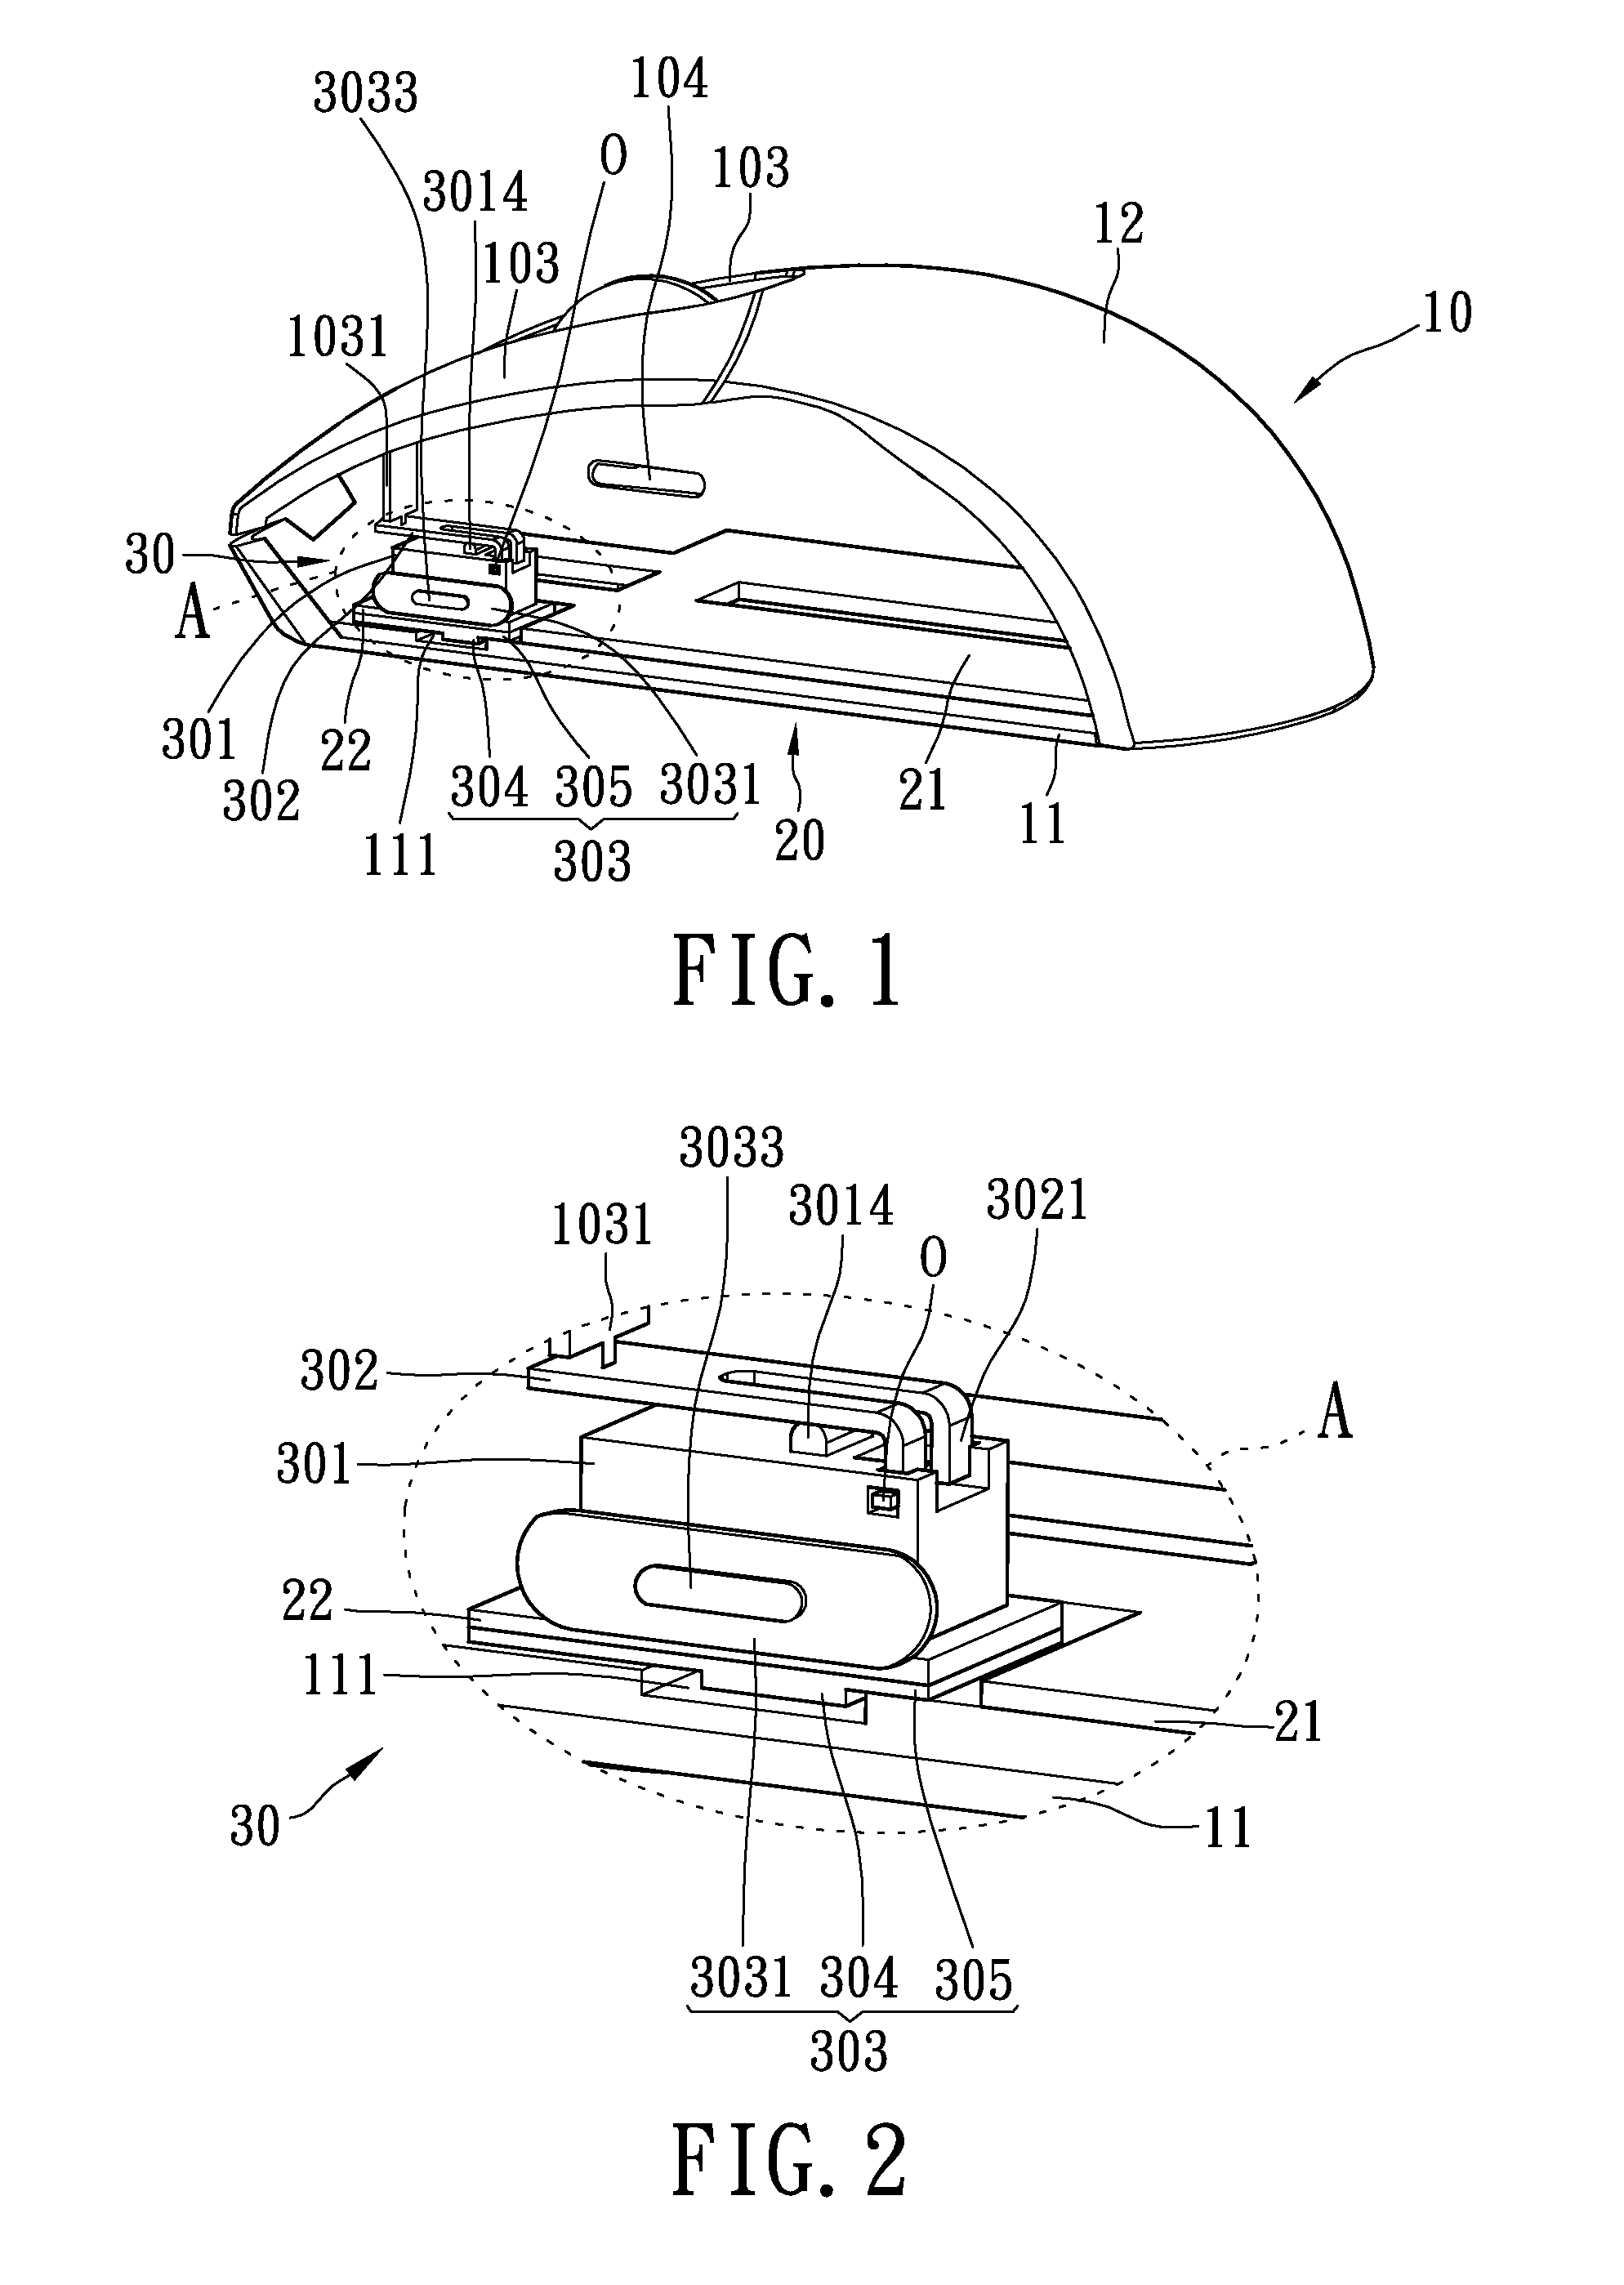 Mouse structure with adjustable clicking force function